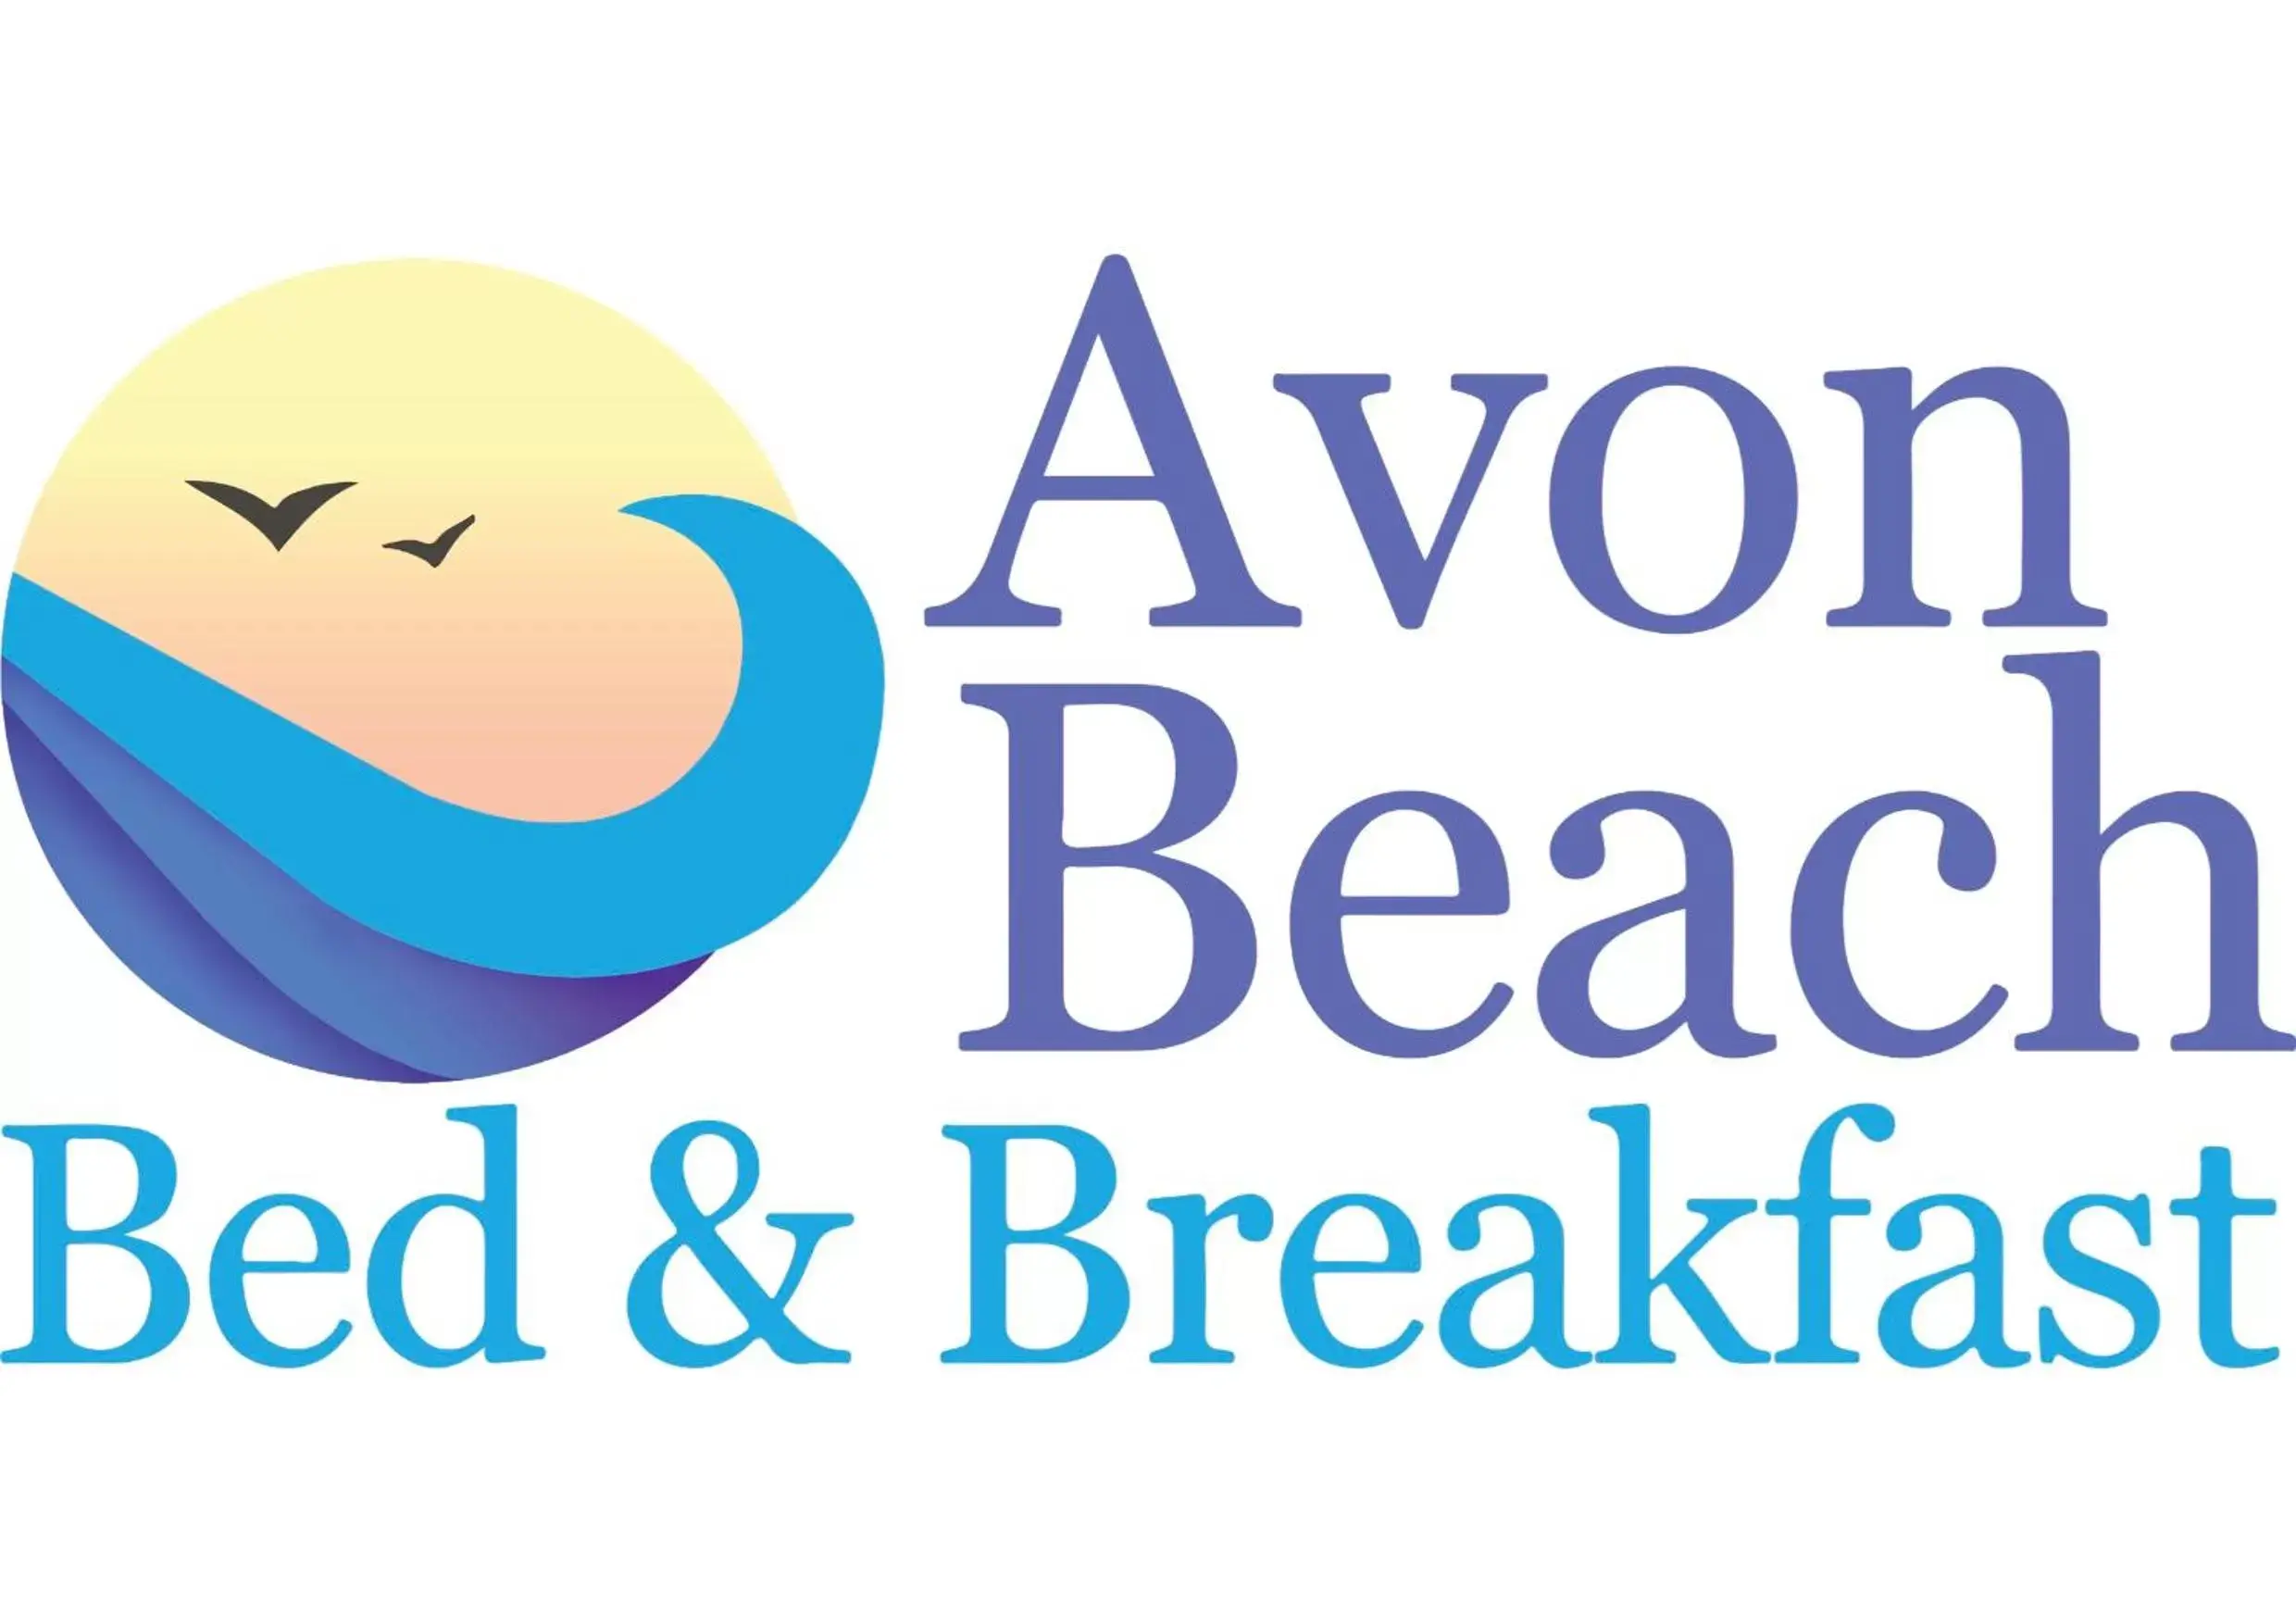 Property logo or sign, Property Logo/Sign in Avon Beach Bed & Breakfast